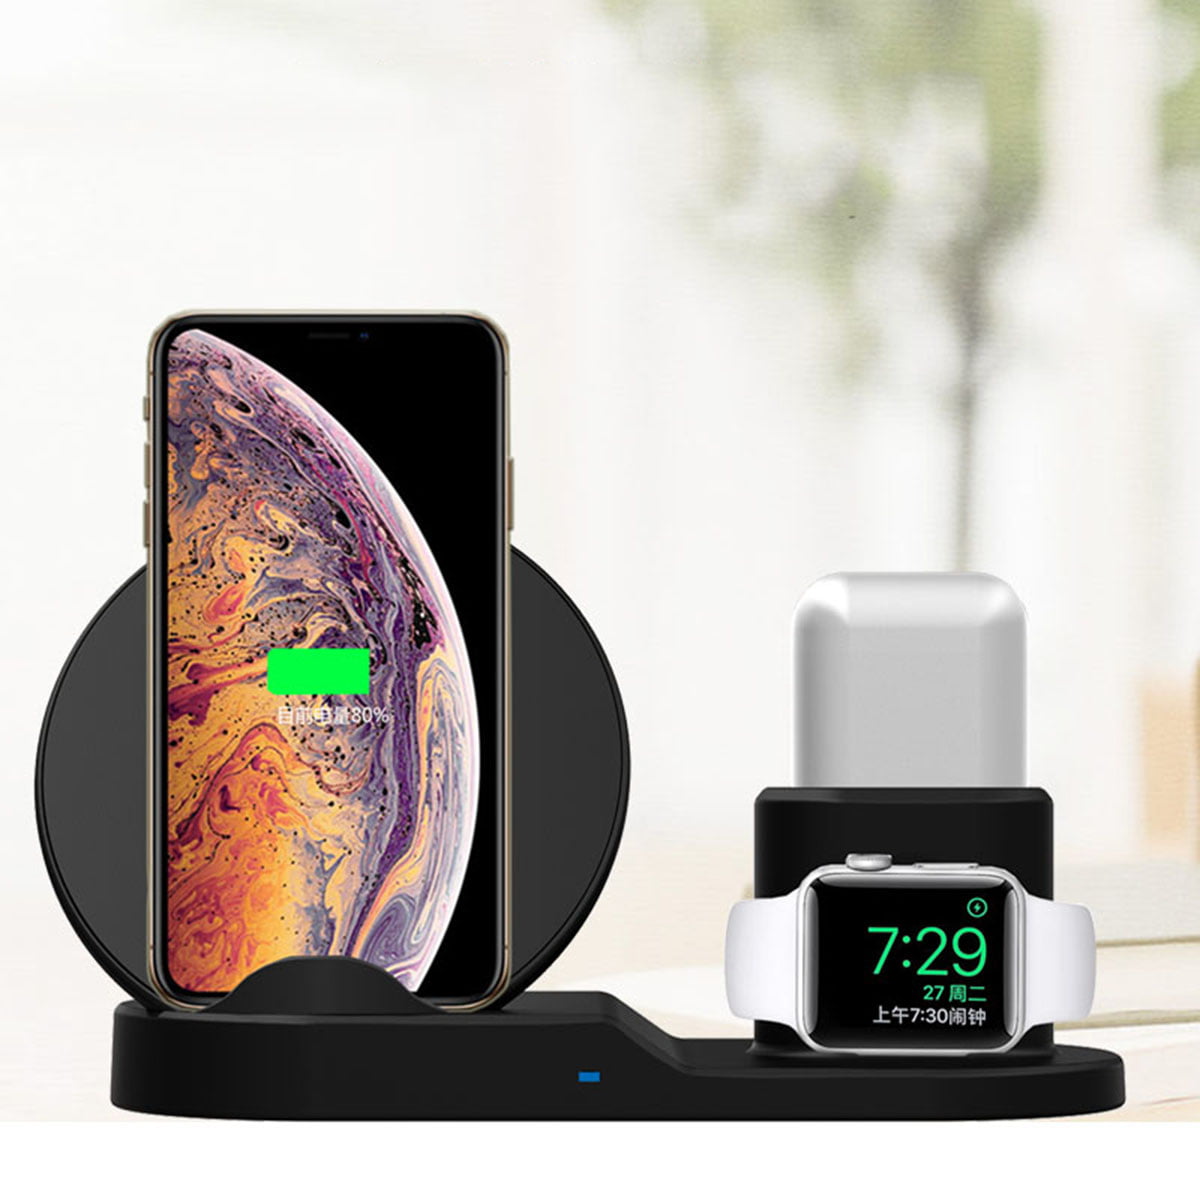 Black No AC Adapter Hyphen-X Wireless Charger Qi-Certified Fast Wireless Charging Pad Compatible with iPhone Xs Max/airpod 2/XS/XR/X/8/8 Plus,Samsung Galaxy Note10/S10/9/S9/S9 Plus/S8/S8 Plus/ 